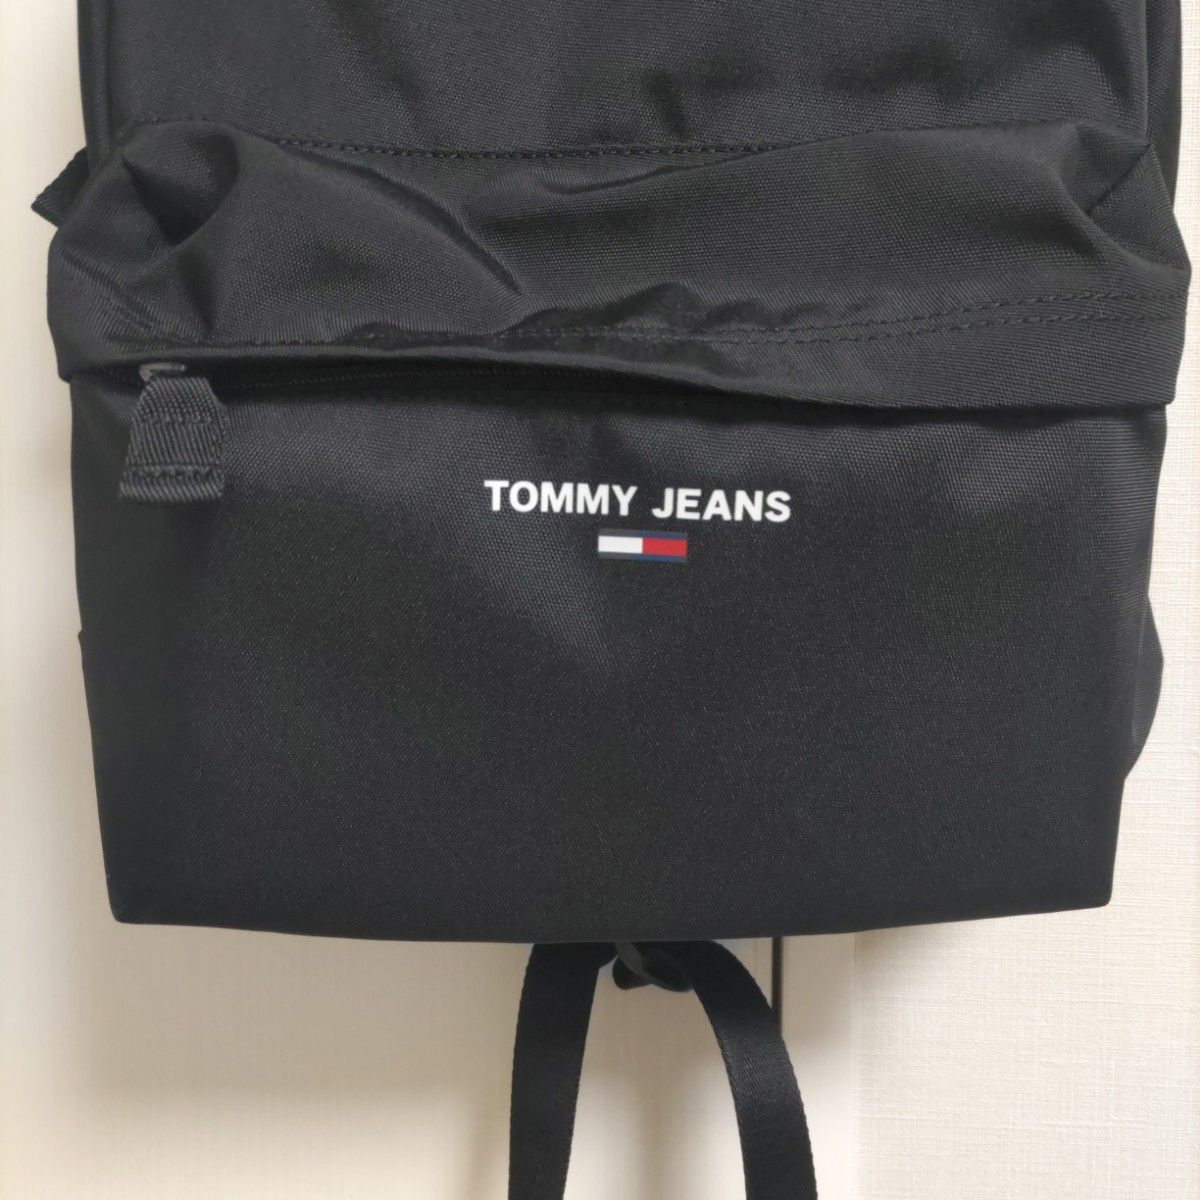 TOMMY JEANS リュック　バックパック 男女兼用